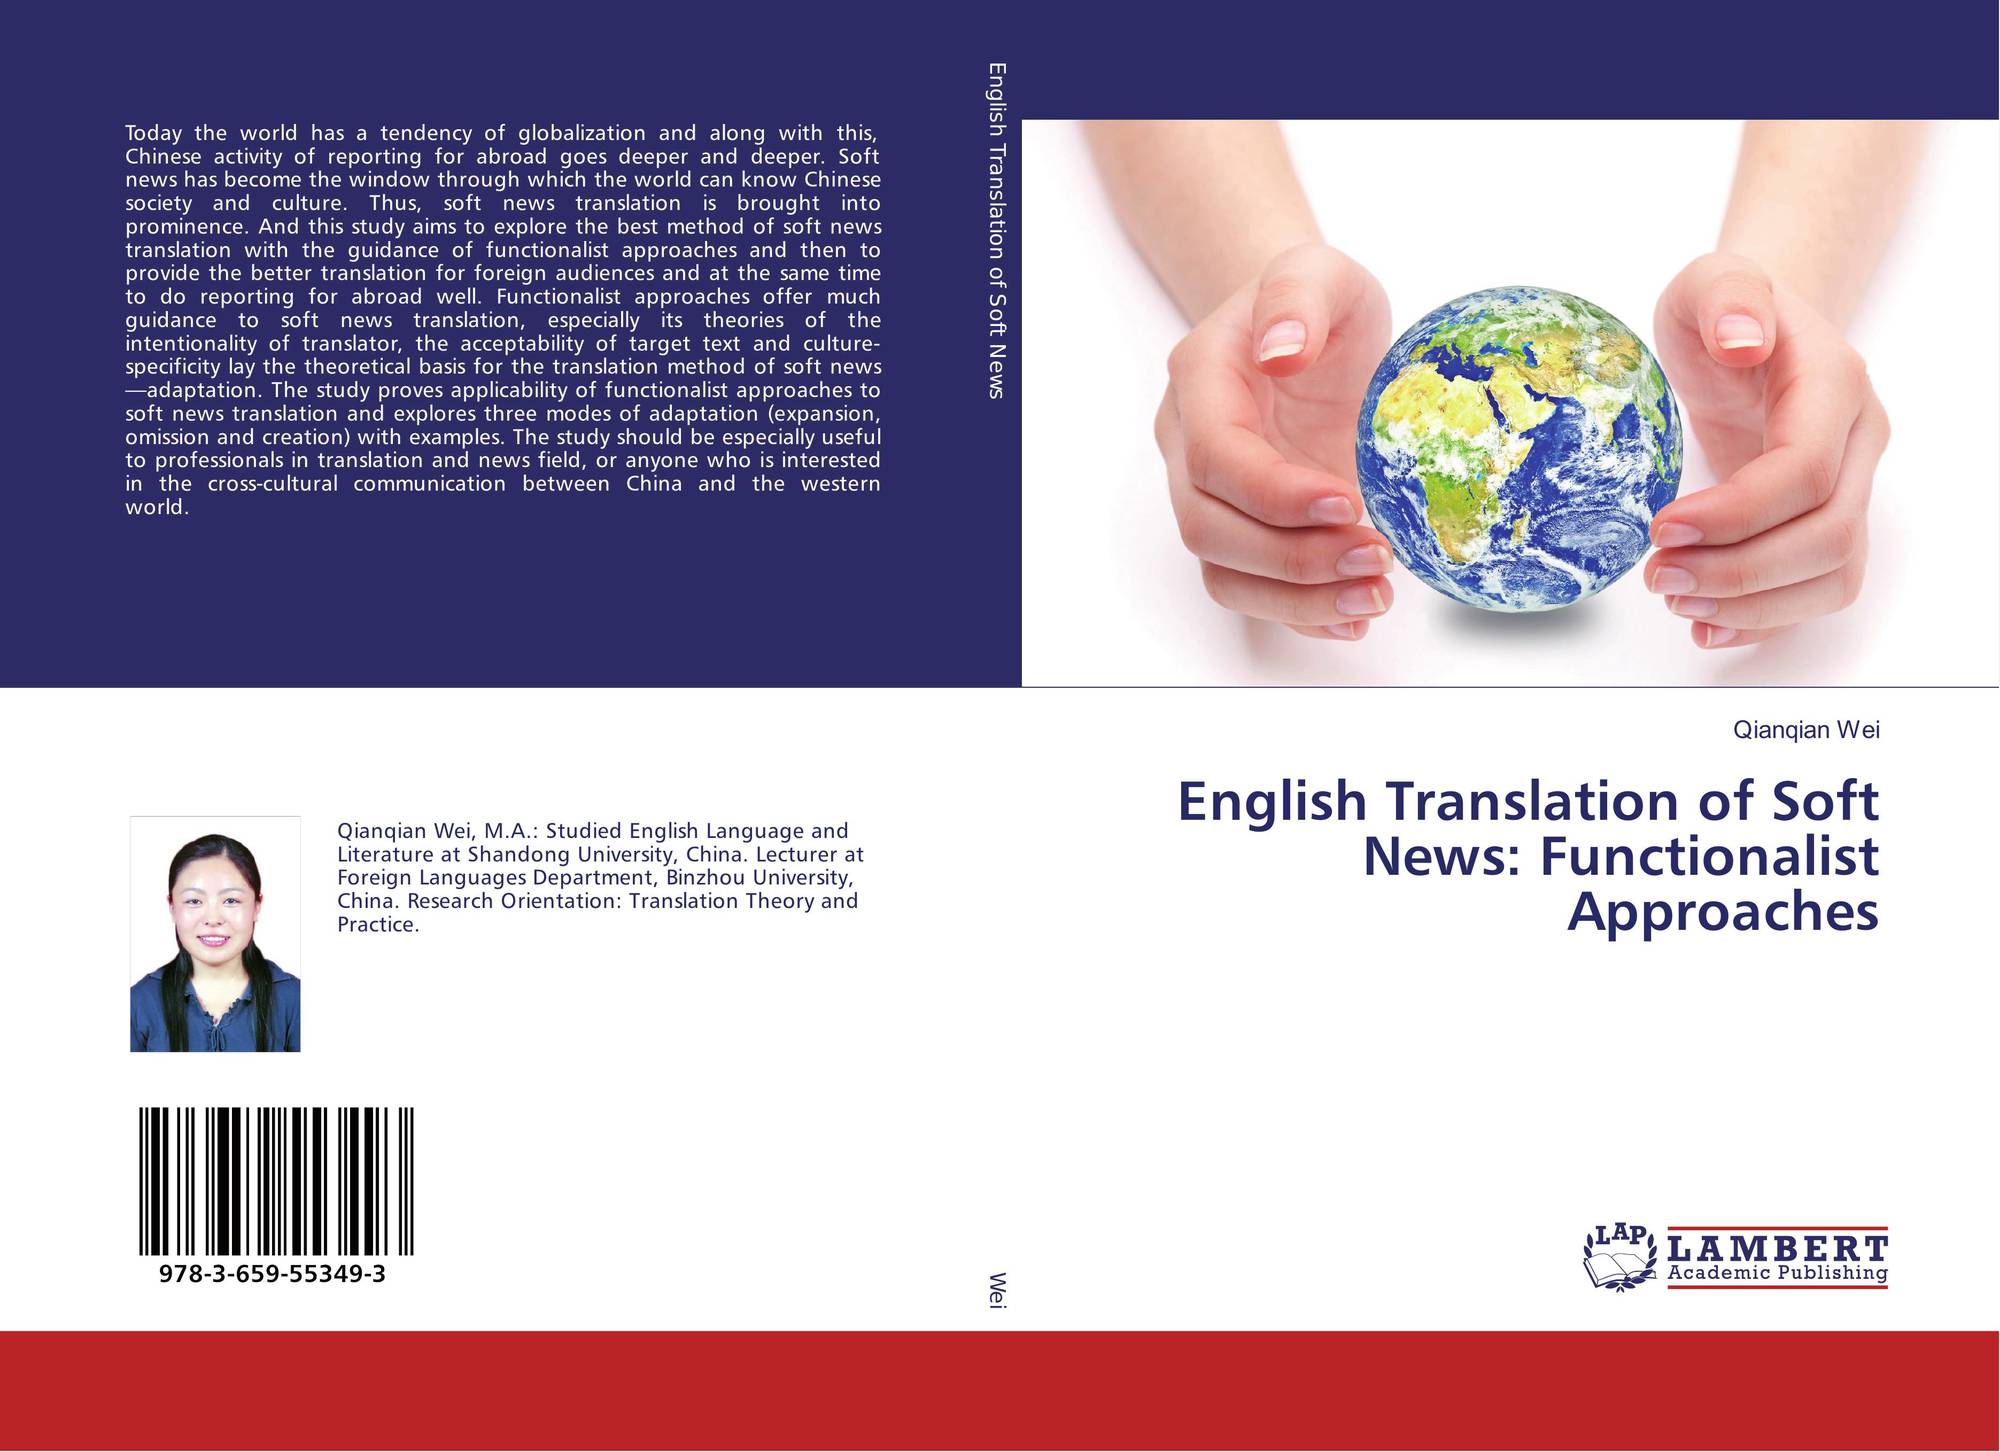 English Translation of Soft News: Functionalist Approaches, 978-3-659